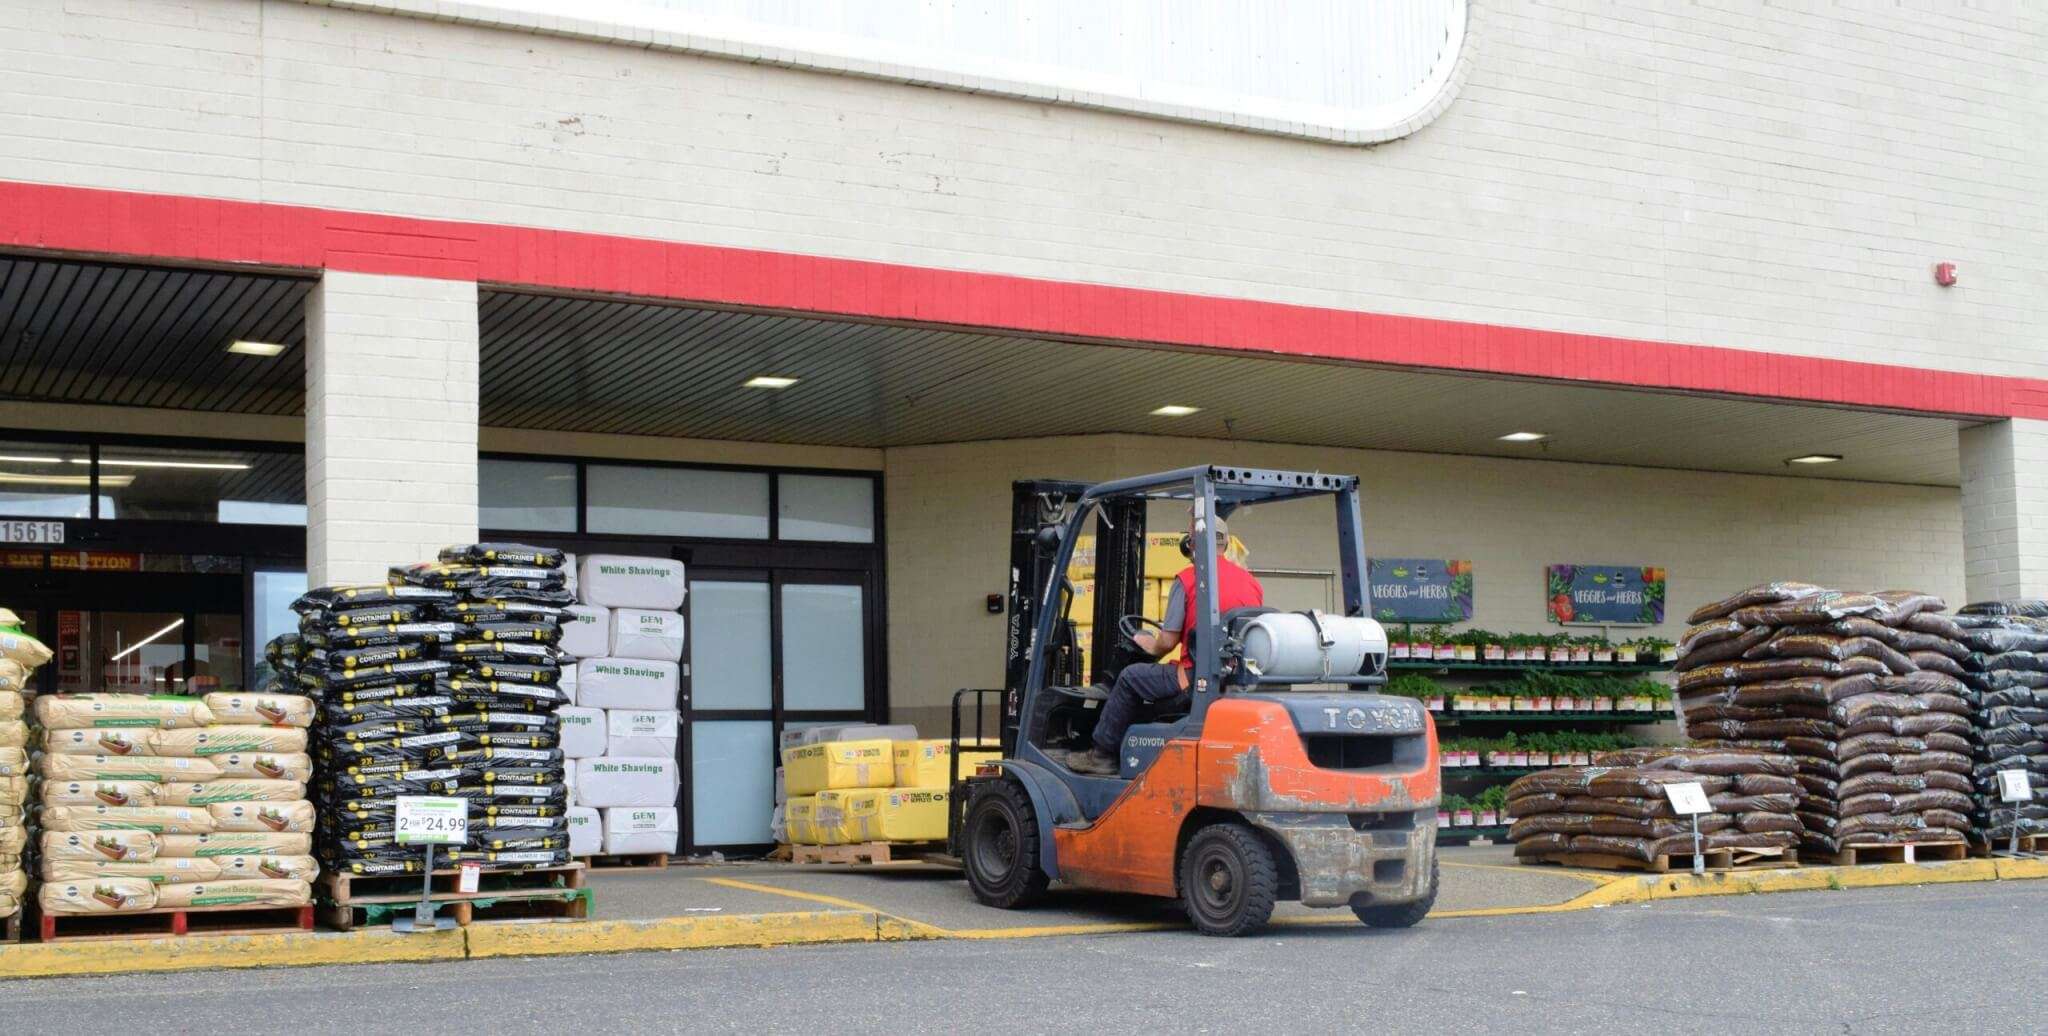 A worker driving a forklift outside a hardware store